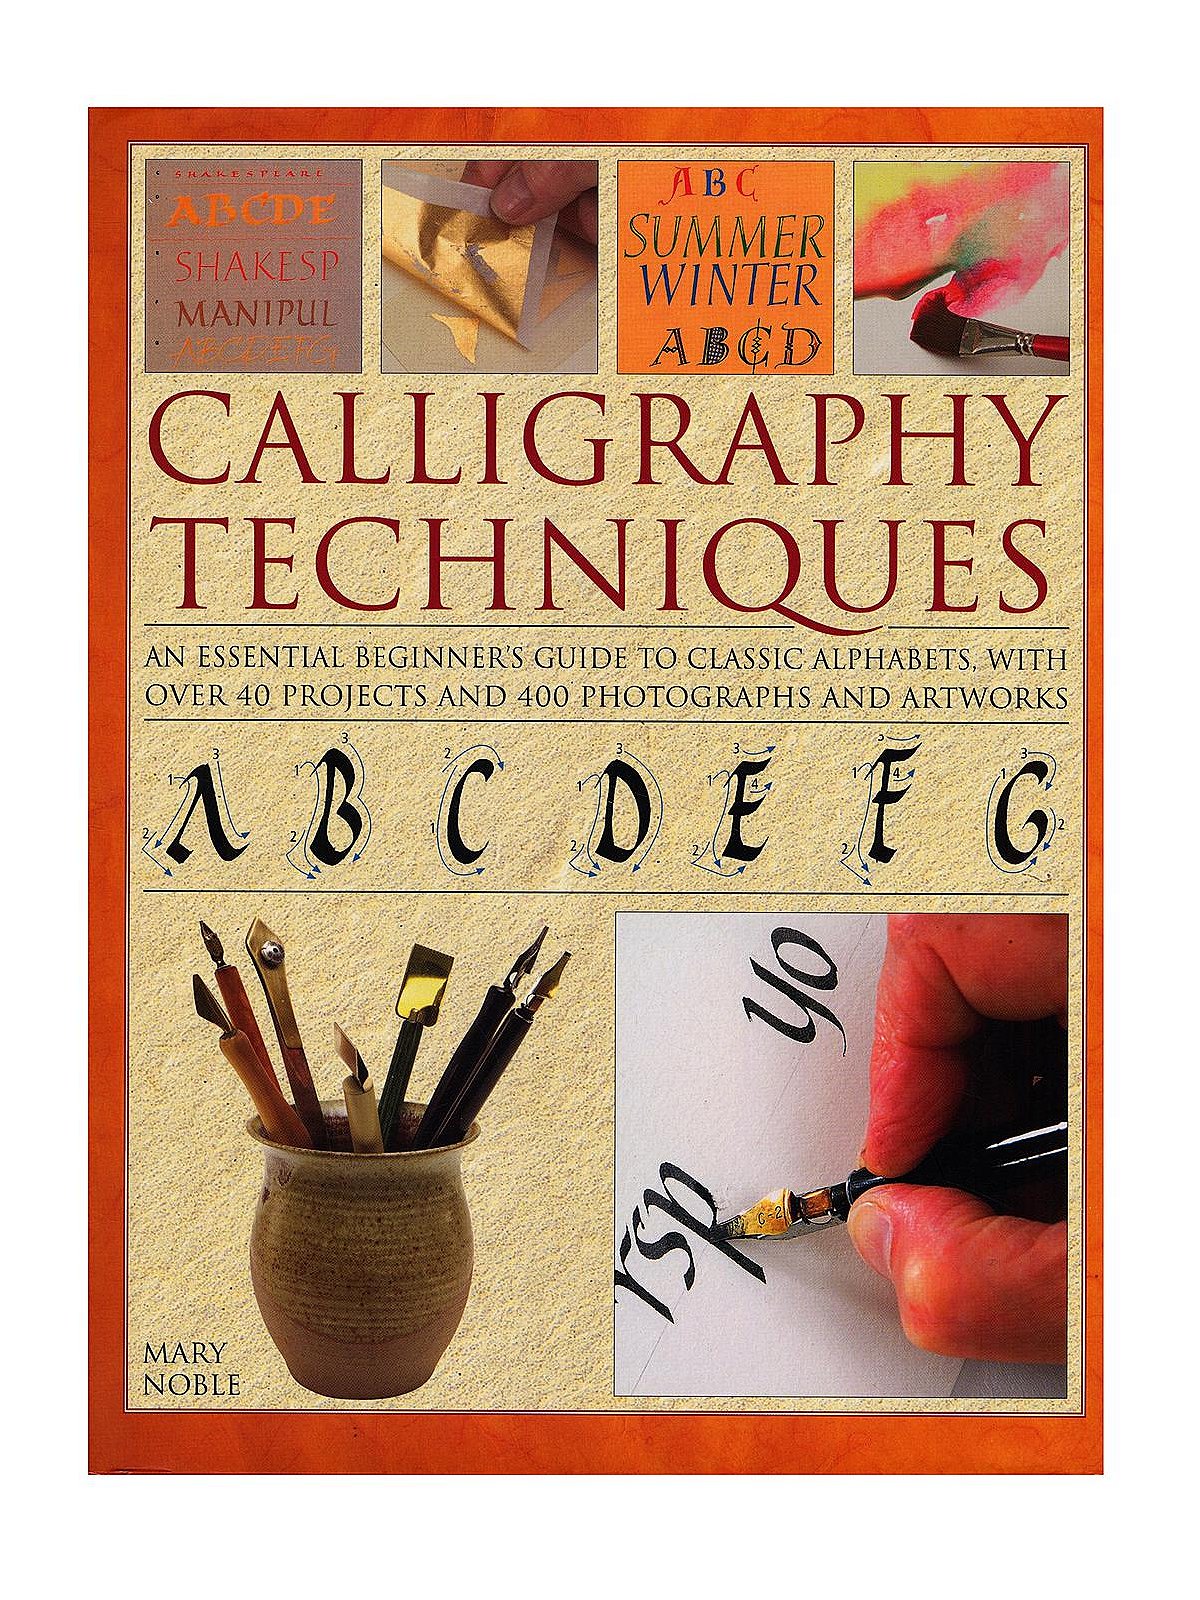 Calligraphy Techniques: An Essential Beginner's Guide to Classic Alphabets, with Over 40 Projects and 400 Photographs and Artworks [Book]